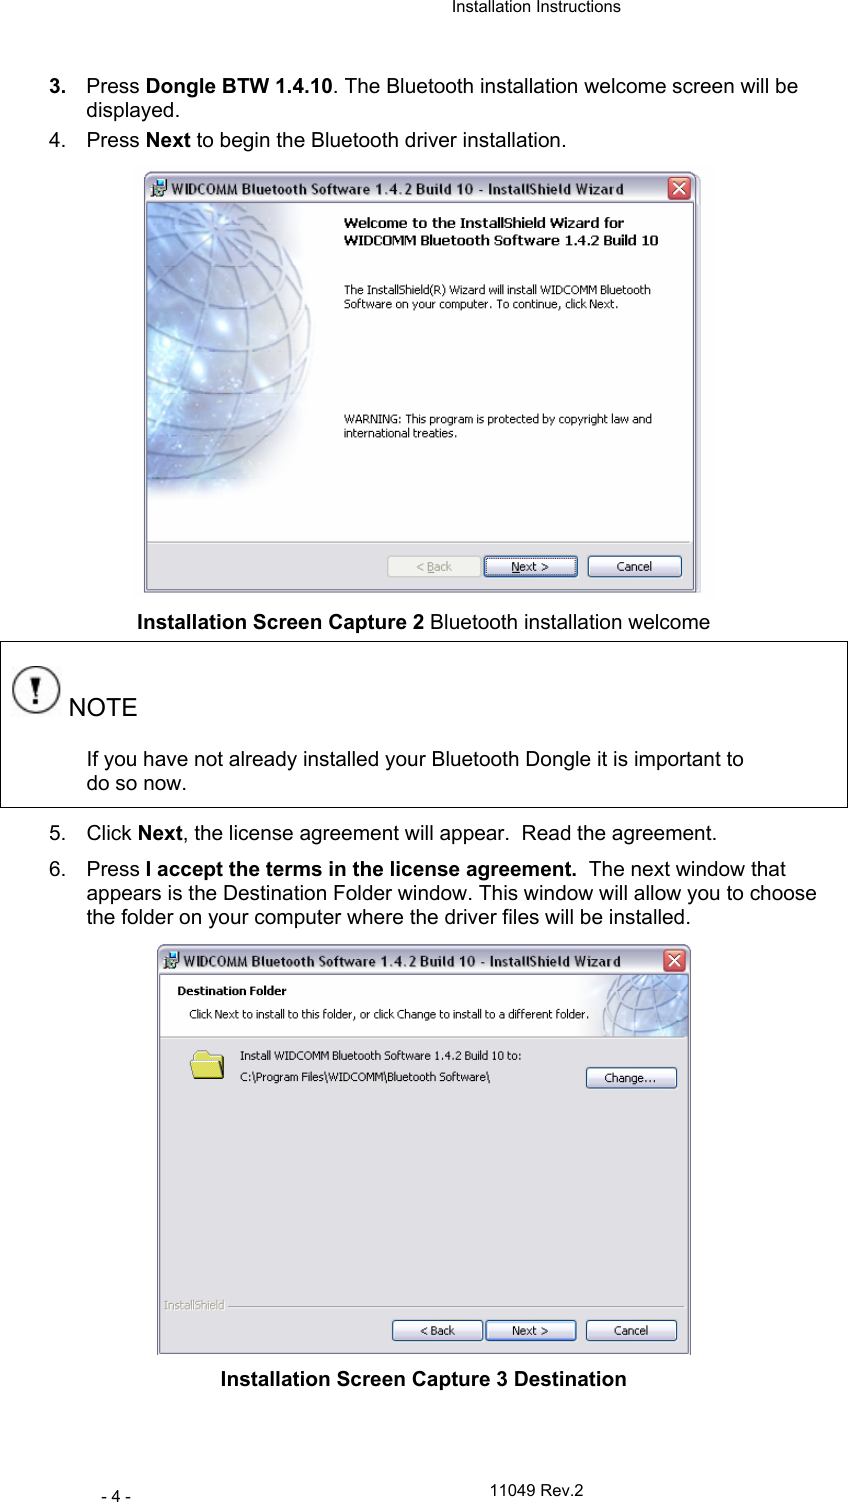  Installation Instructions   11049 Rev.2 - 4 - 3.  Press Dongle BTW 1.4.10. The Bluetooth installation welcome screen will be displayed. 4. Press Next to begin the Bluetooth driver installation.  Installation Screen Capture 2 Bluetooth installation welcome  NOTE If you have not already installed your Bluetooth Dongle it is important to do so now. 5. Click Next, the license agreement will appear.  Read the agreement.  6. Press I accept the terms in the license agreement.  The next window that appears is the Destination Folder window. This window will allow you to choose the folder on your computer where the driver files will be installed.  Installation Screen Capture 3 Destination 